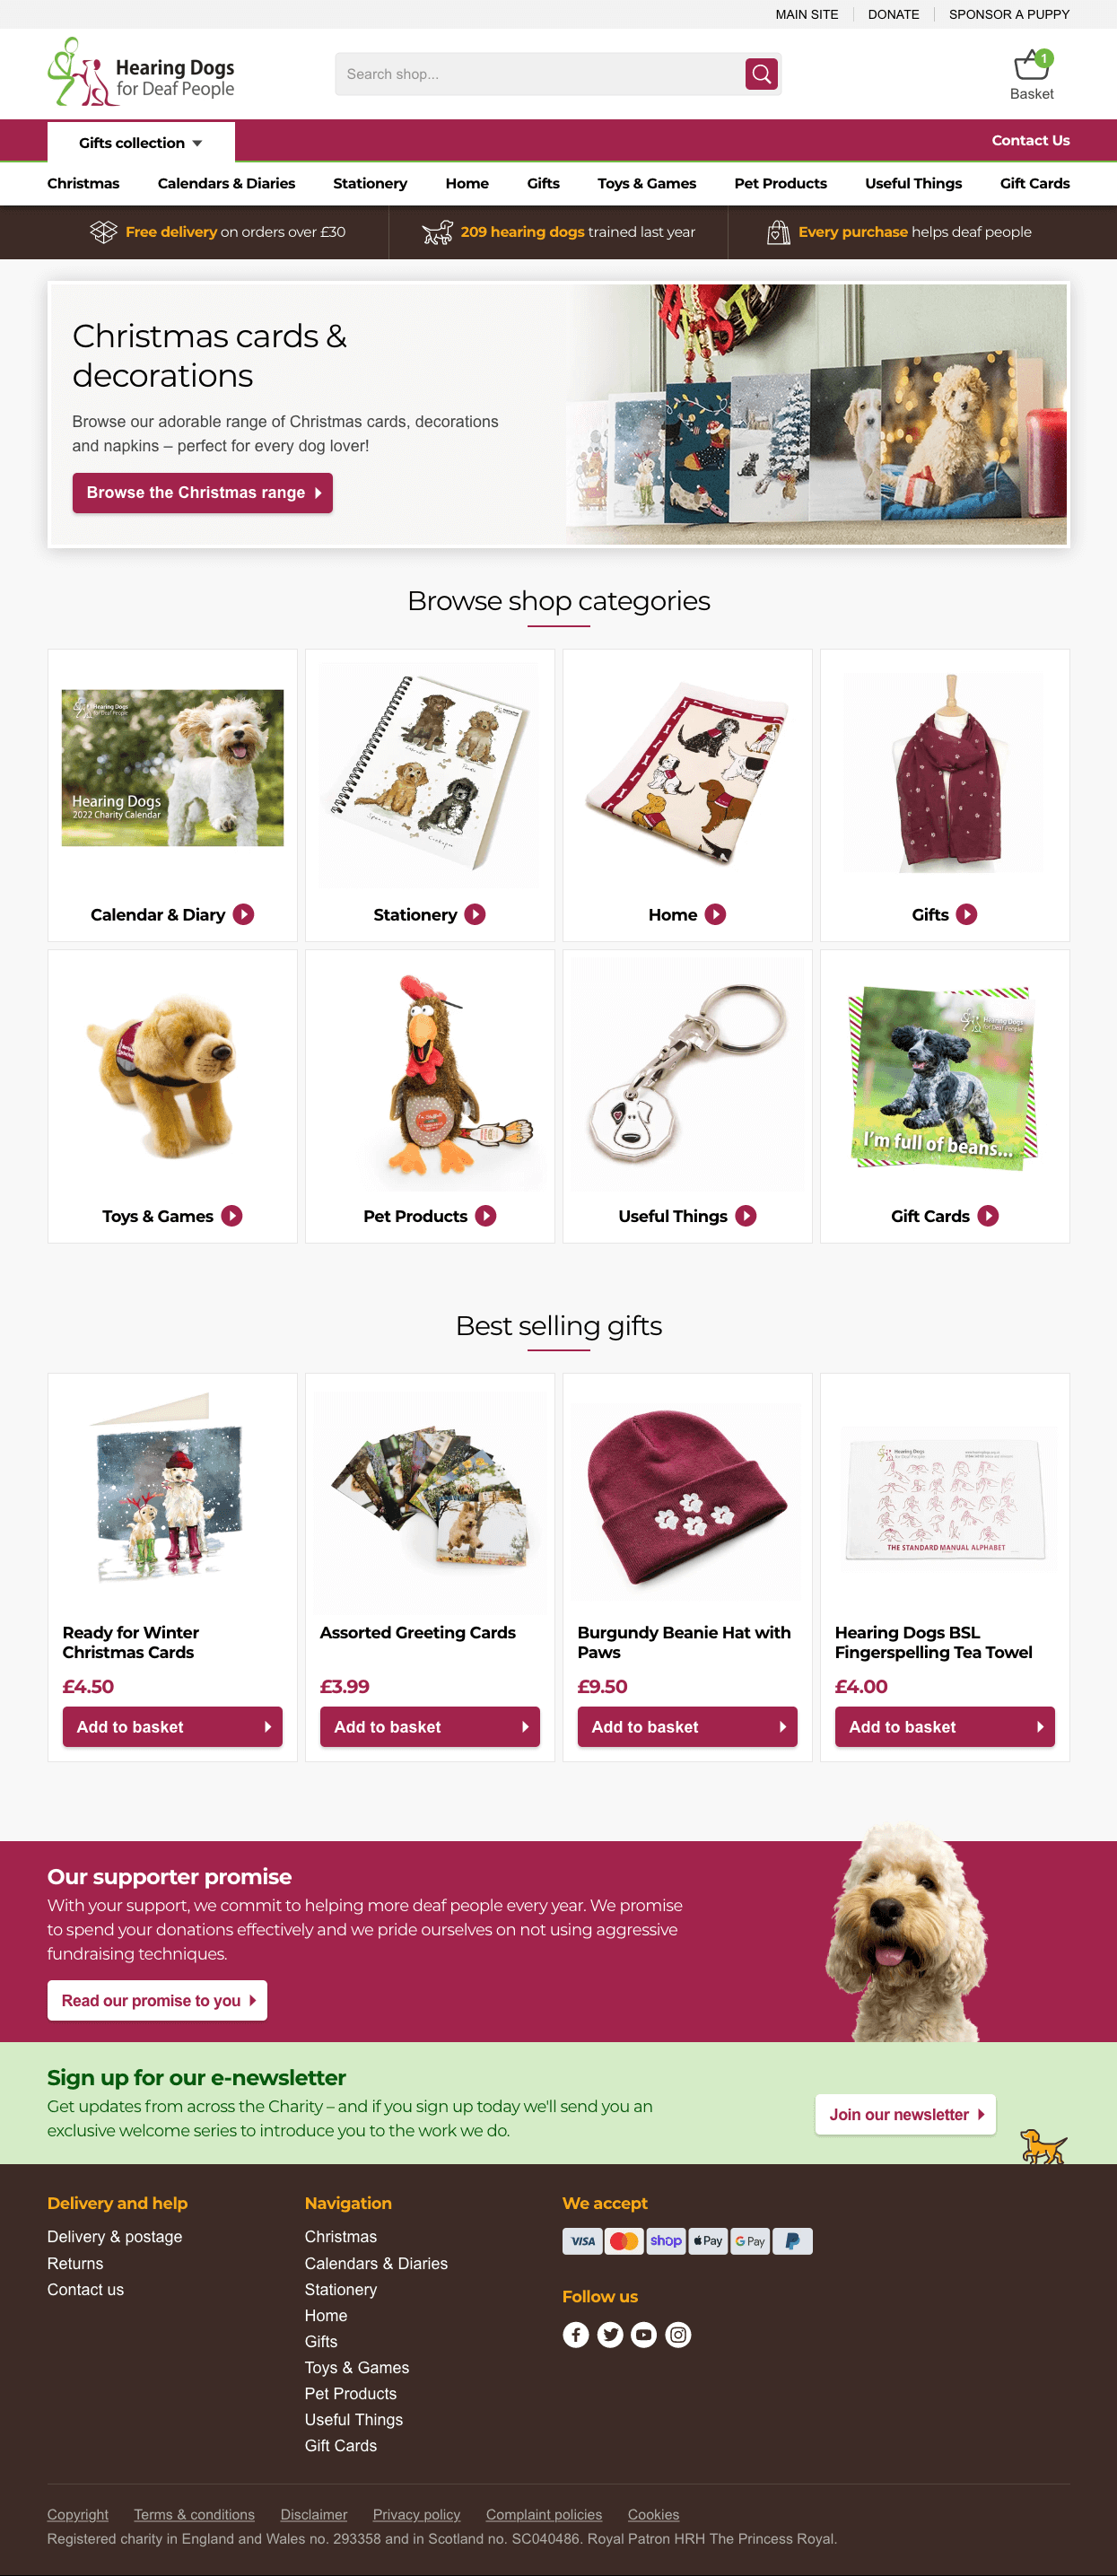 The live Hearing Dogs homepage with customisable sections.